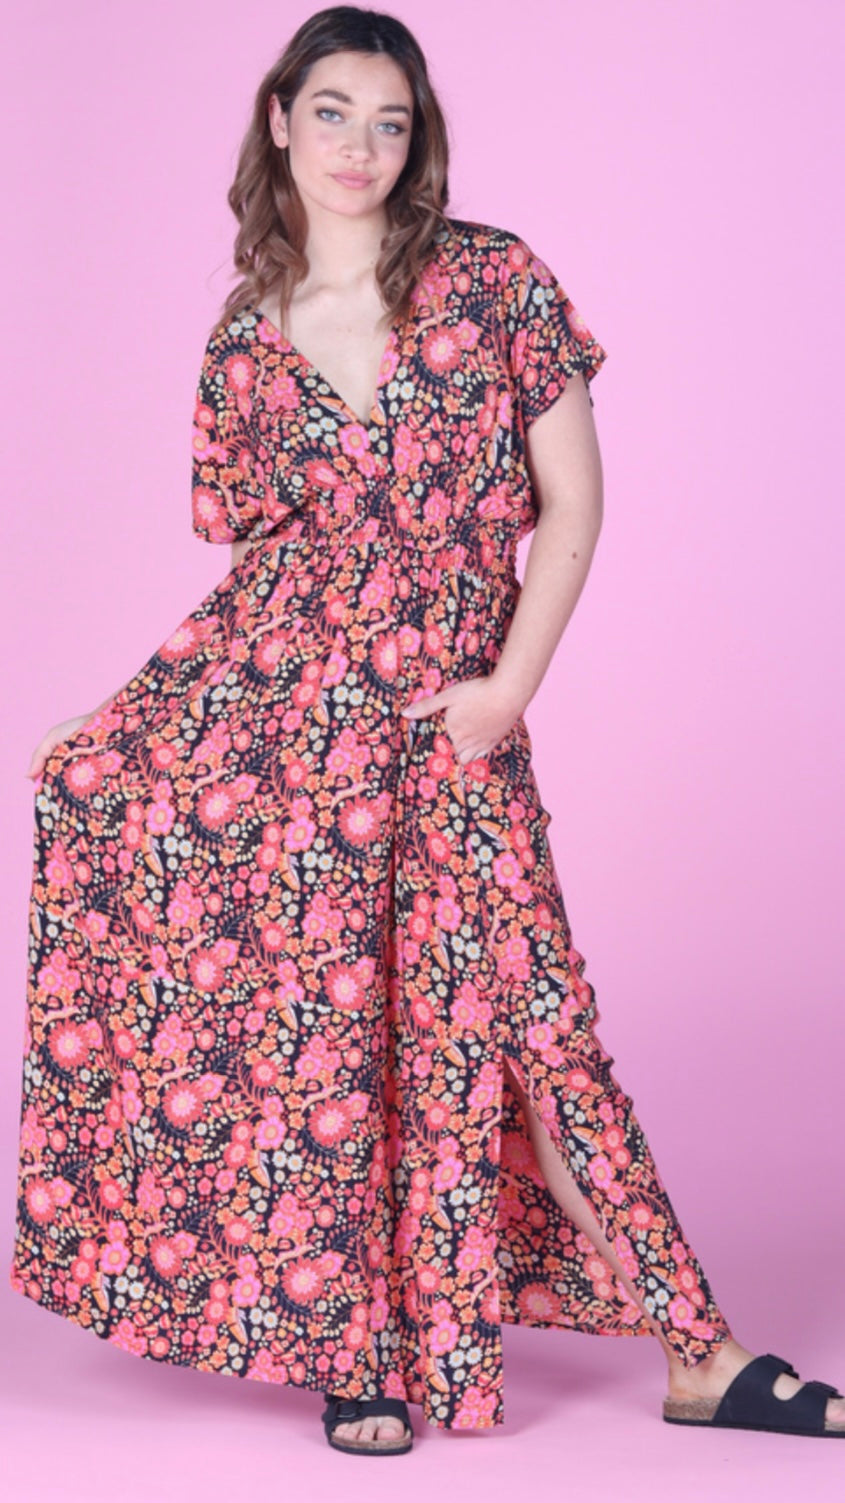 The Zen Dress features the stunning Daydreamer print from Honey &amp; Stone Co

It has tshirt length sleeves with a slight flutter and comes into a v at the bust
The - Zen Maxi Dress - Daydreamer - Honey & Stone